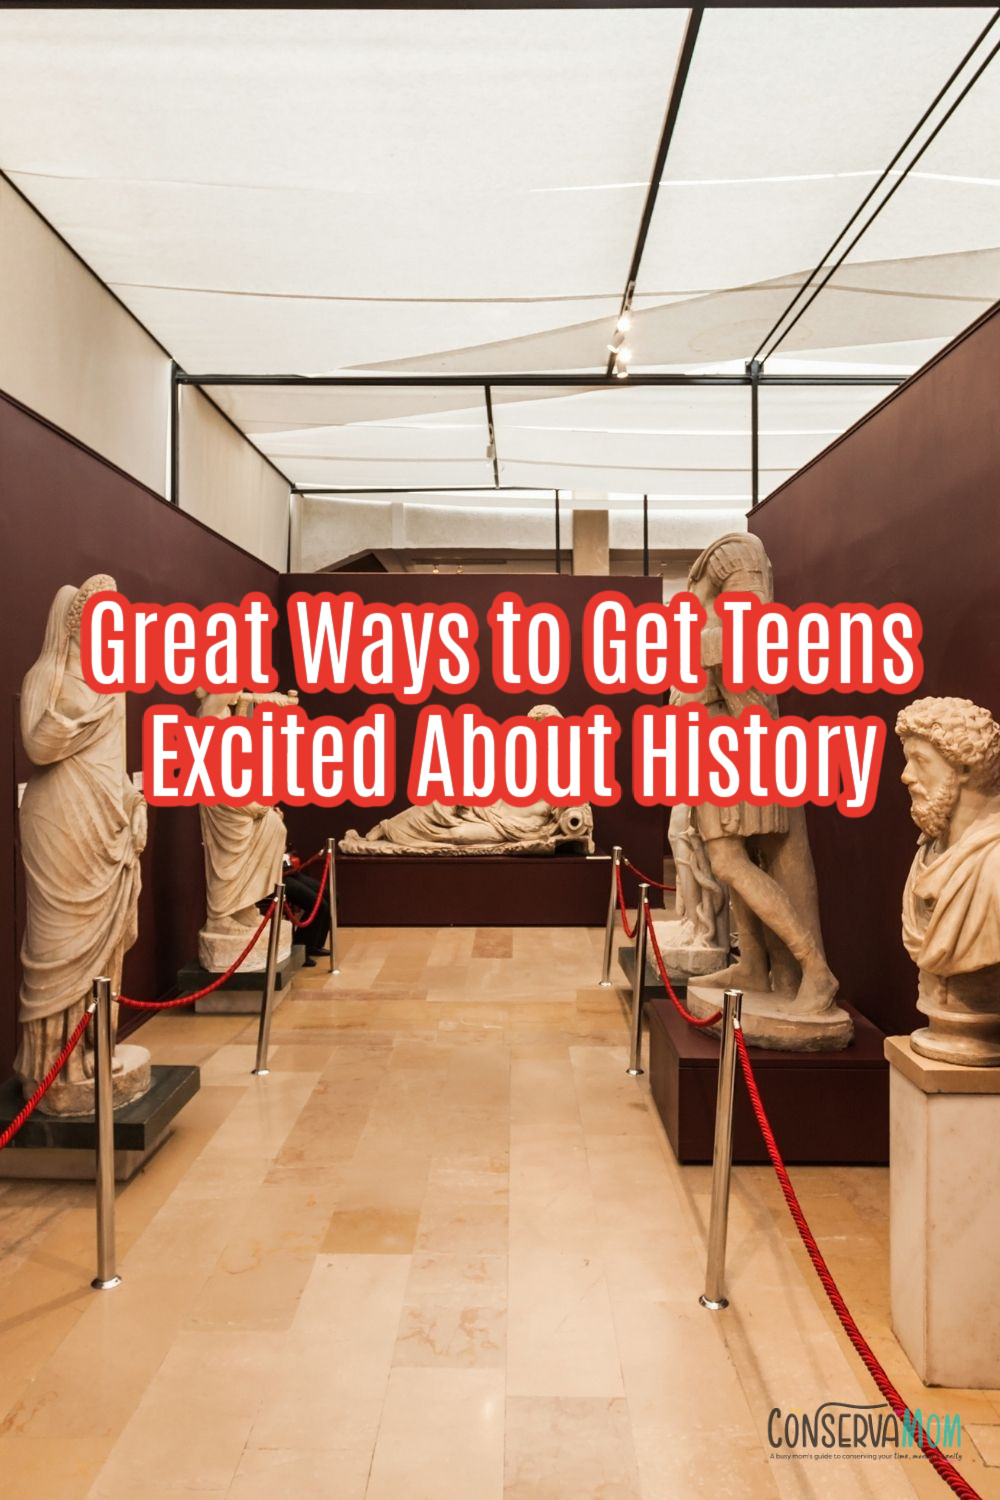 Great Ways to Get Teens Excited About History